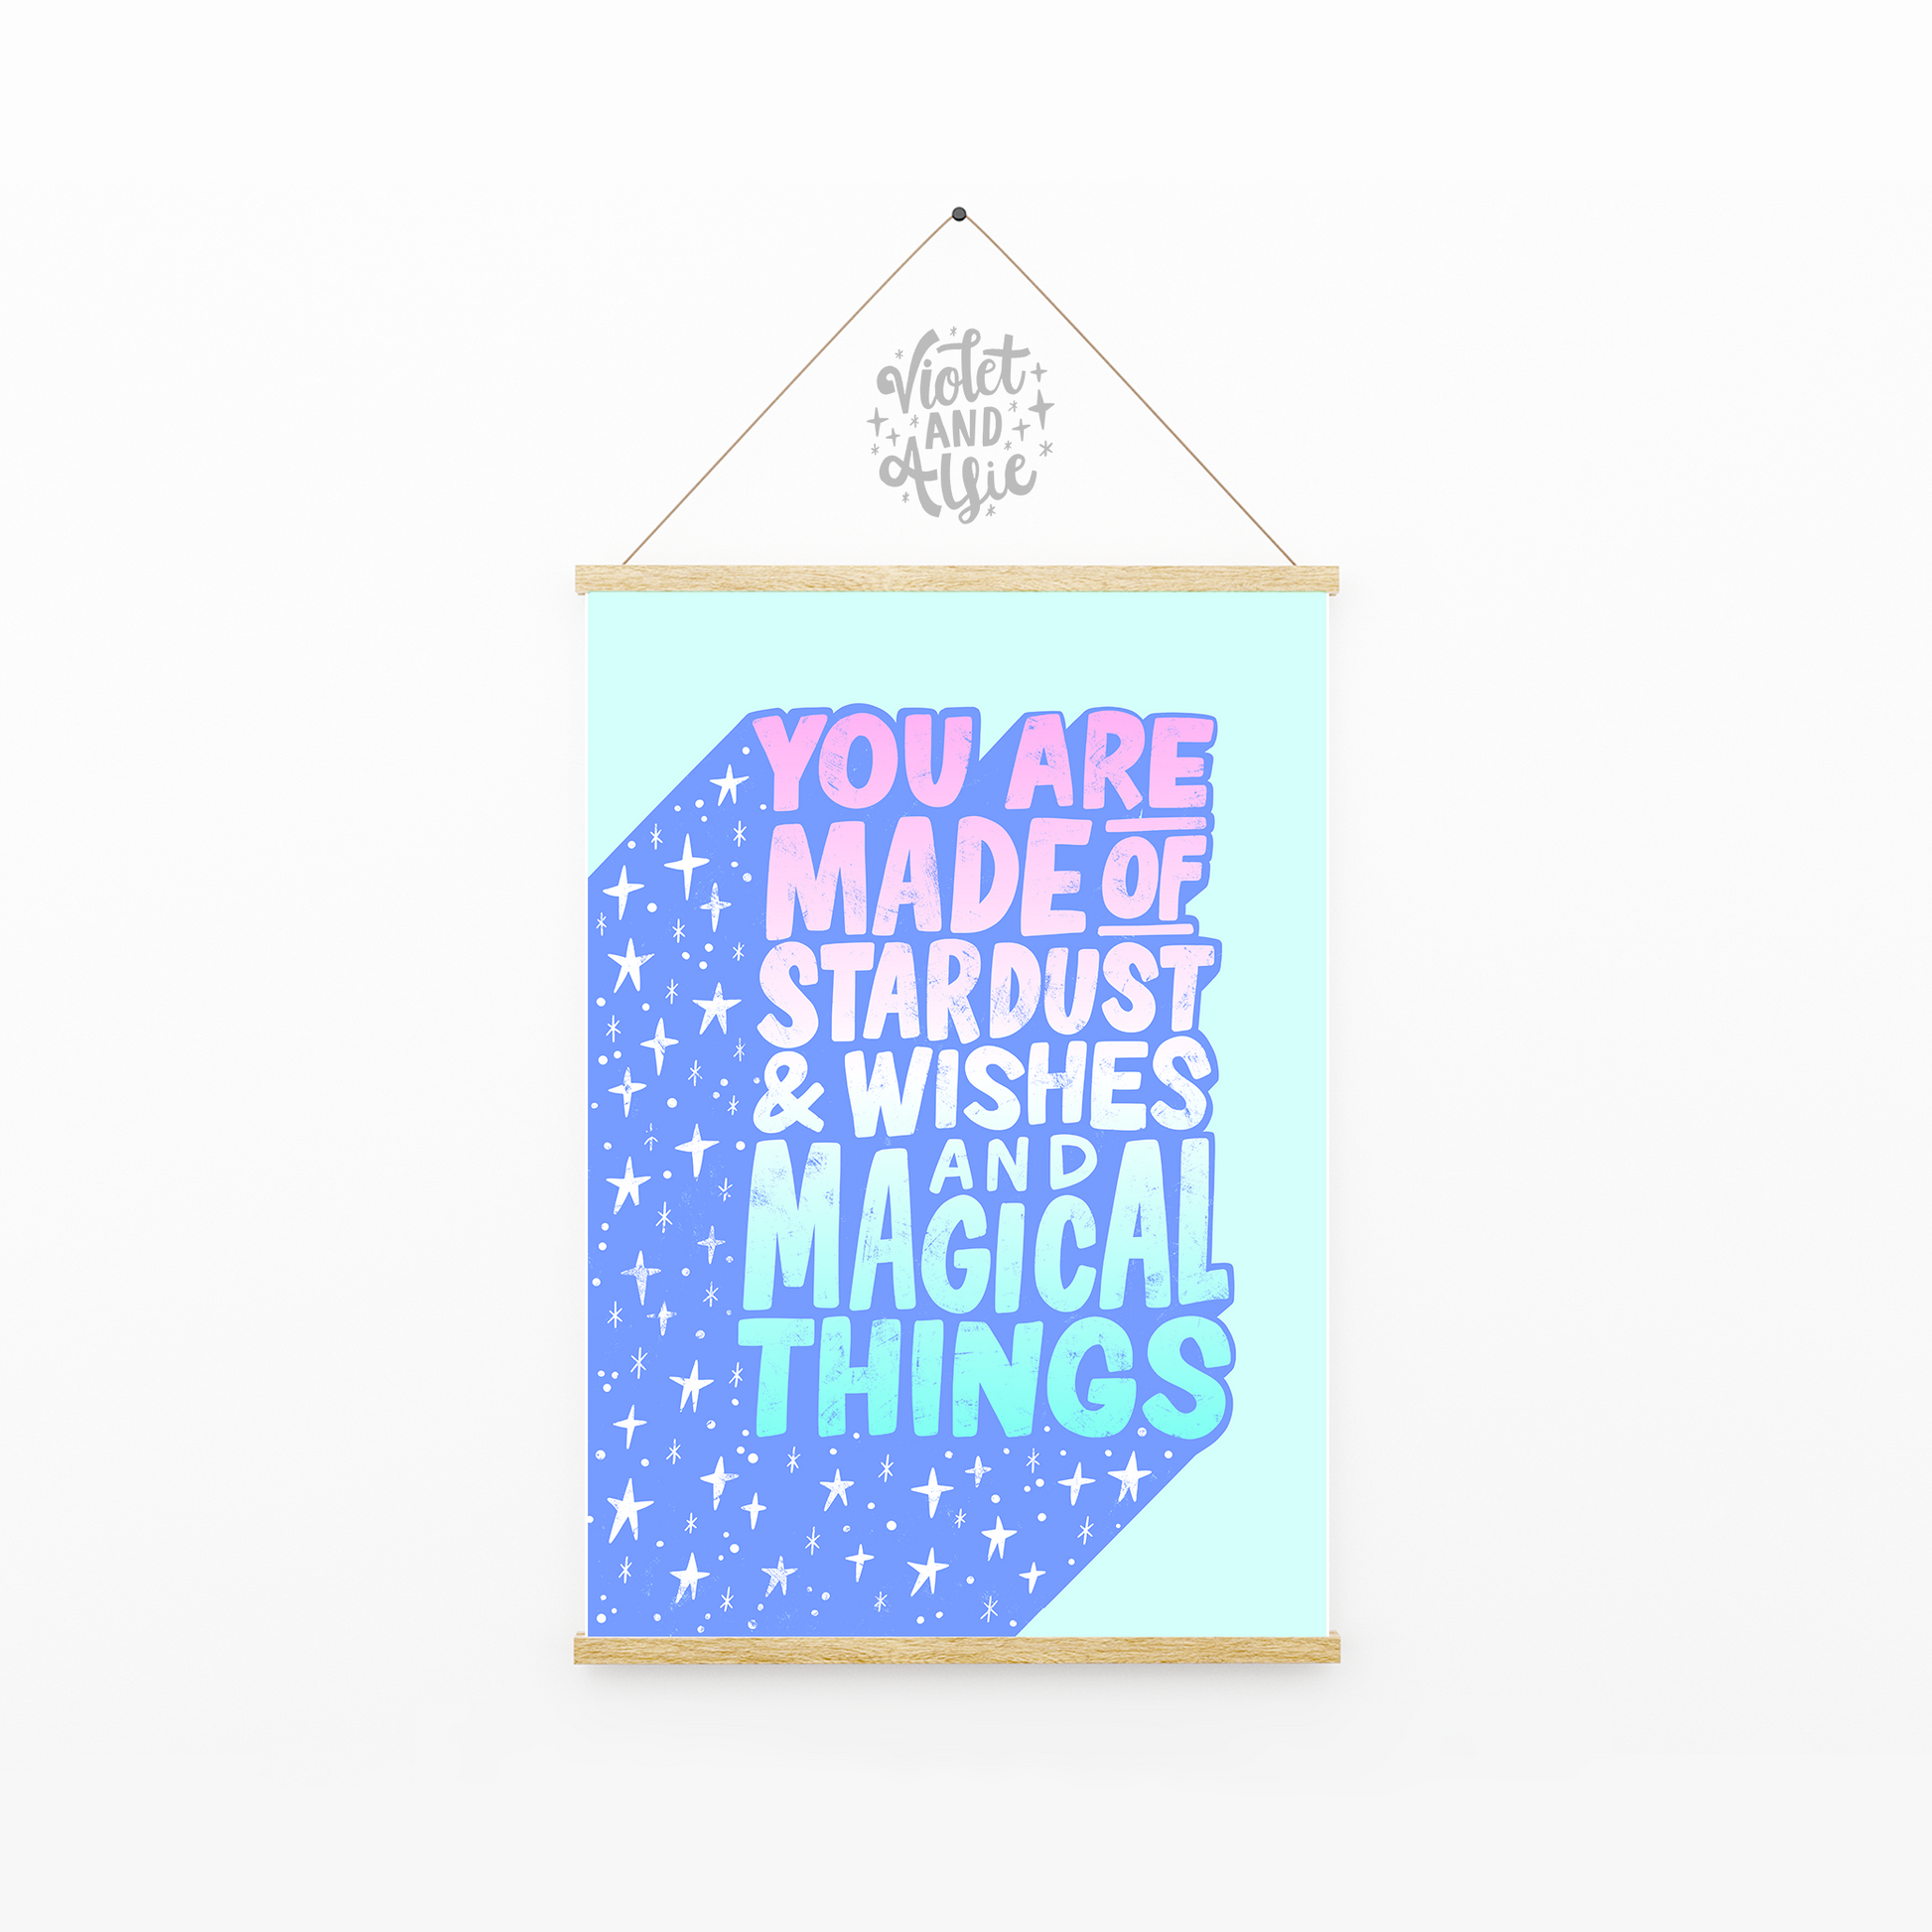 You are made of Stardust and Wishes and Magical thing,  colourful typographic print, Stardust quote,  Inspirational quote print, colourful home decor, children's room wall art, positive prints, star art, maximalist wall prints art, empowering quote print, encouragement gift